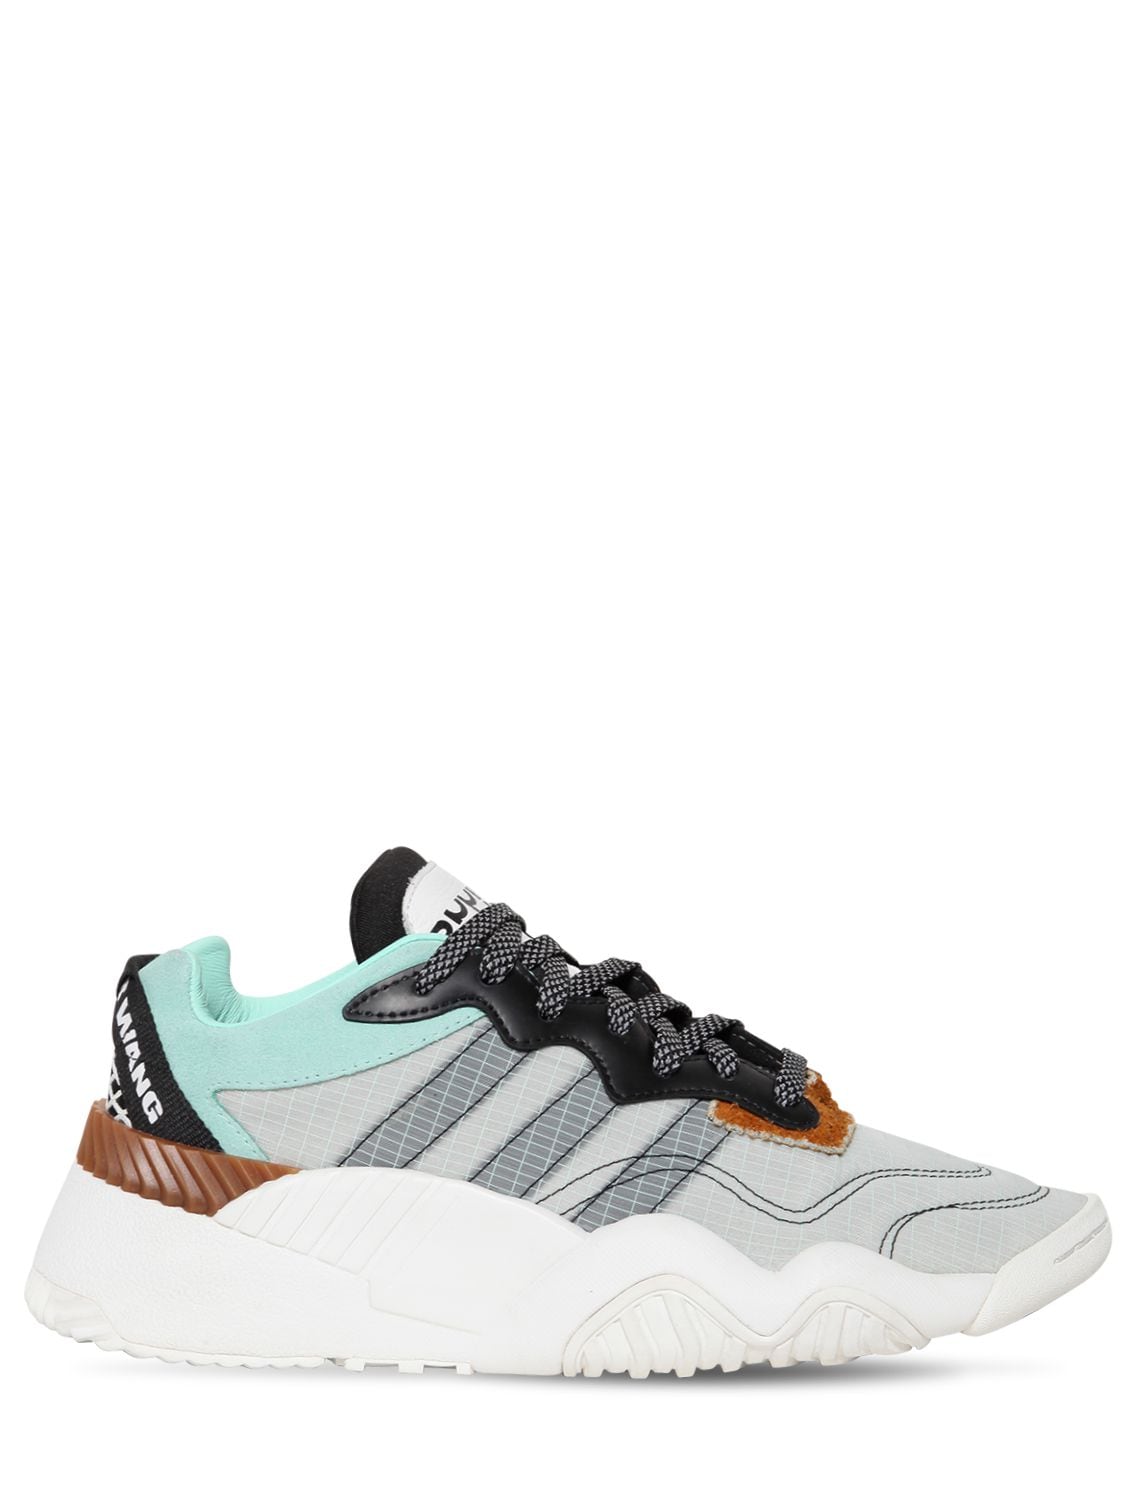 Finalmente luto crucero Adidas Originals By Alexander Wang Aw Turnout Trainer Sneakers In Grey |  ModeSens